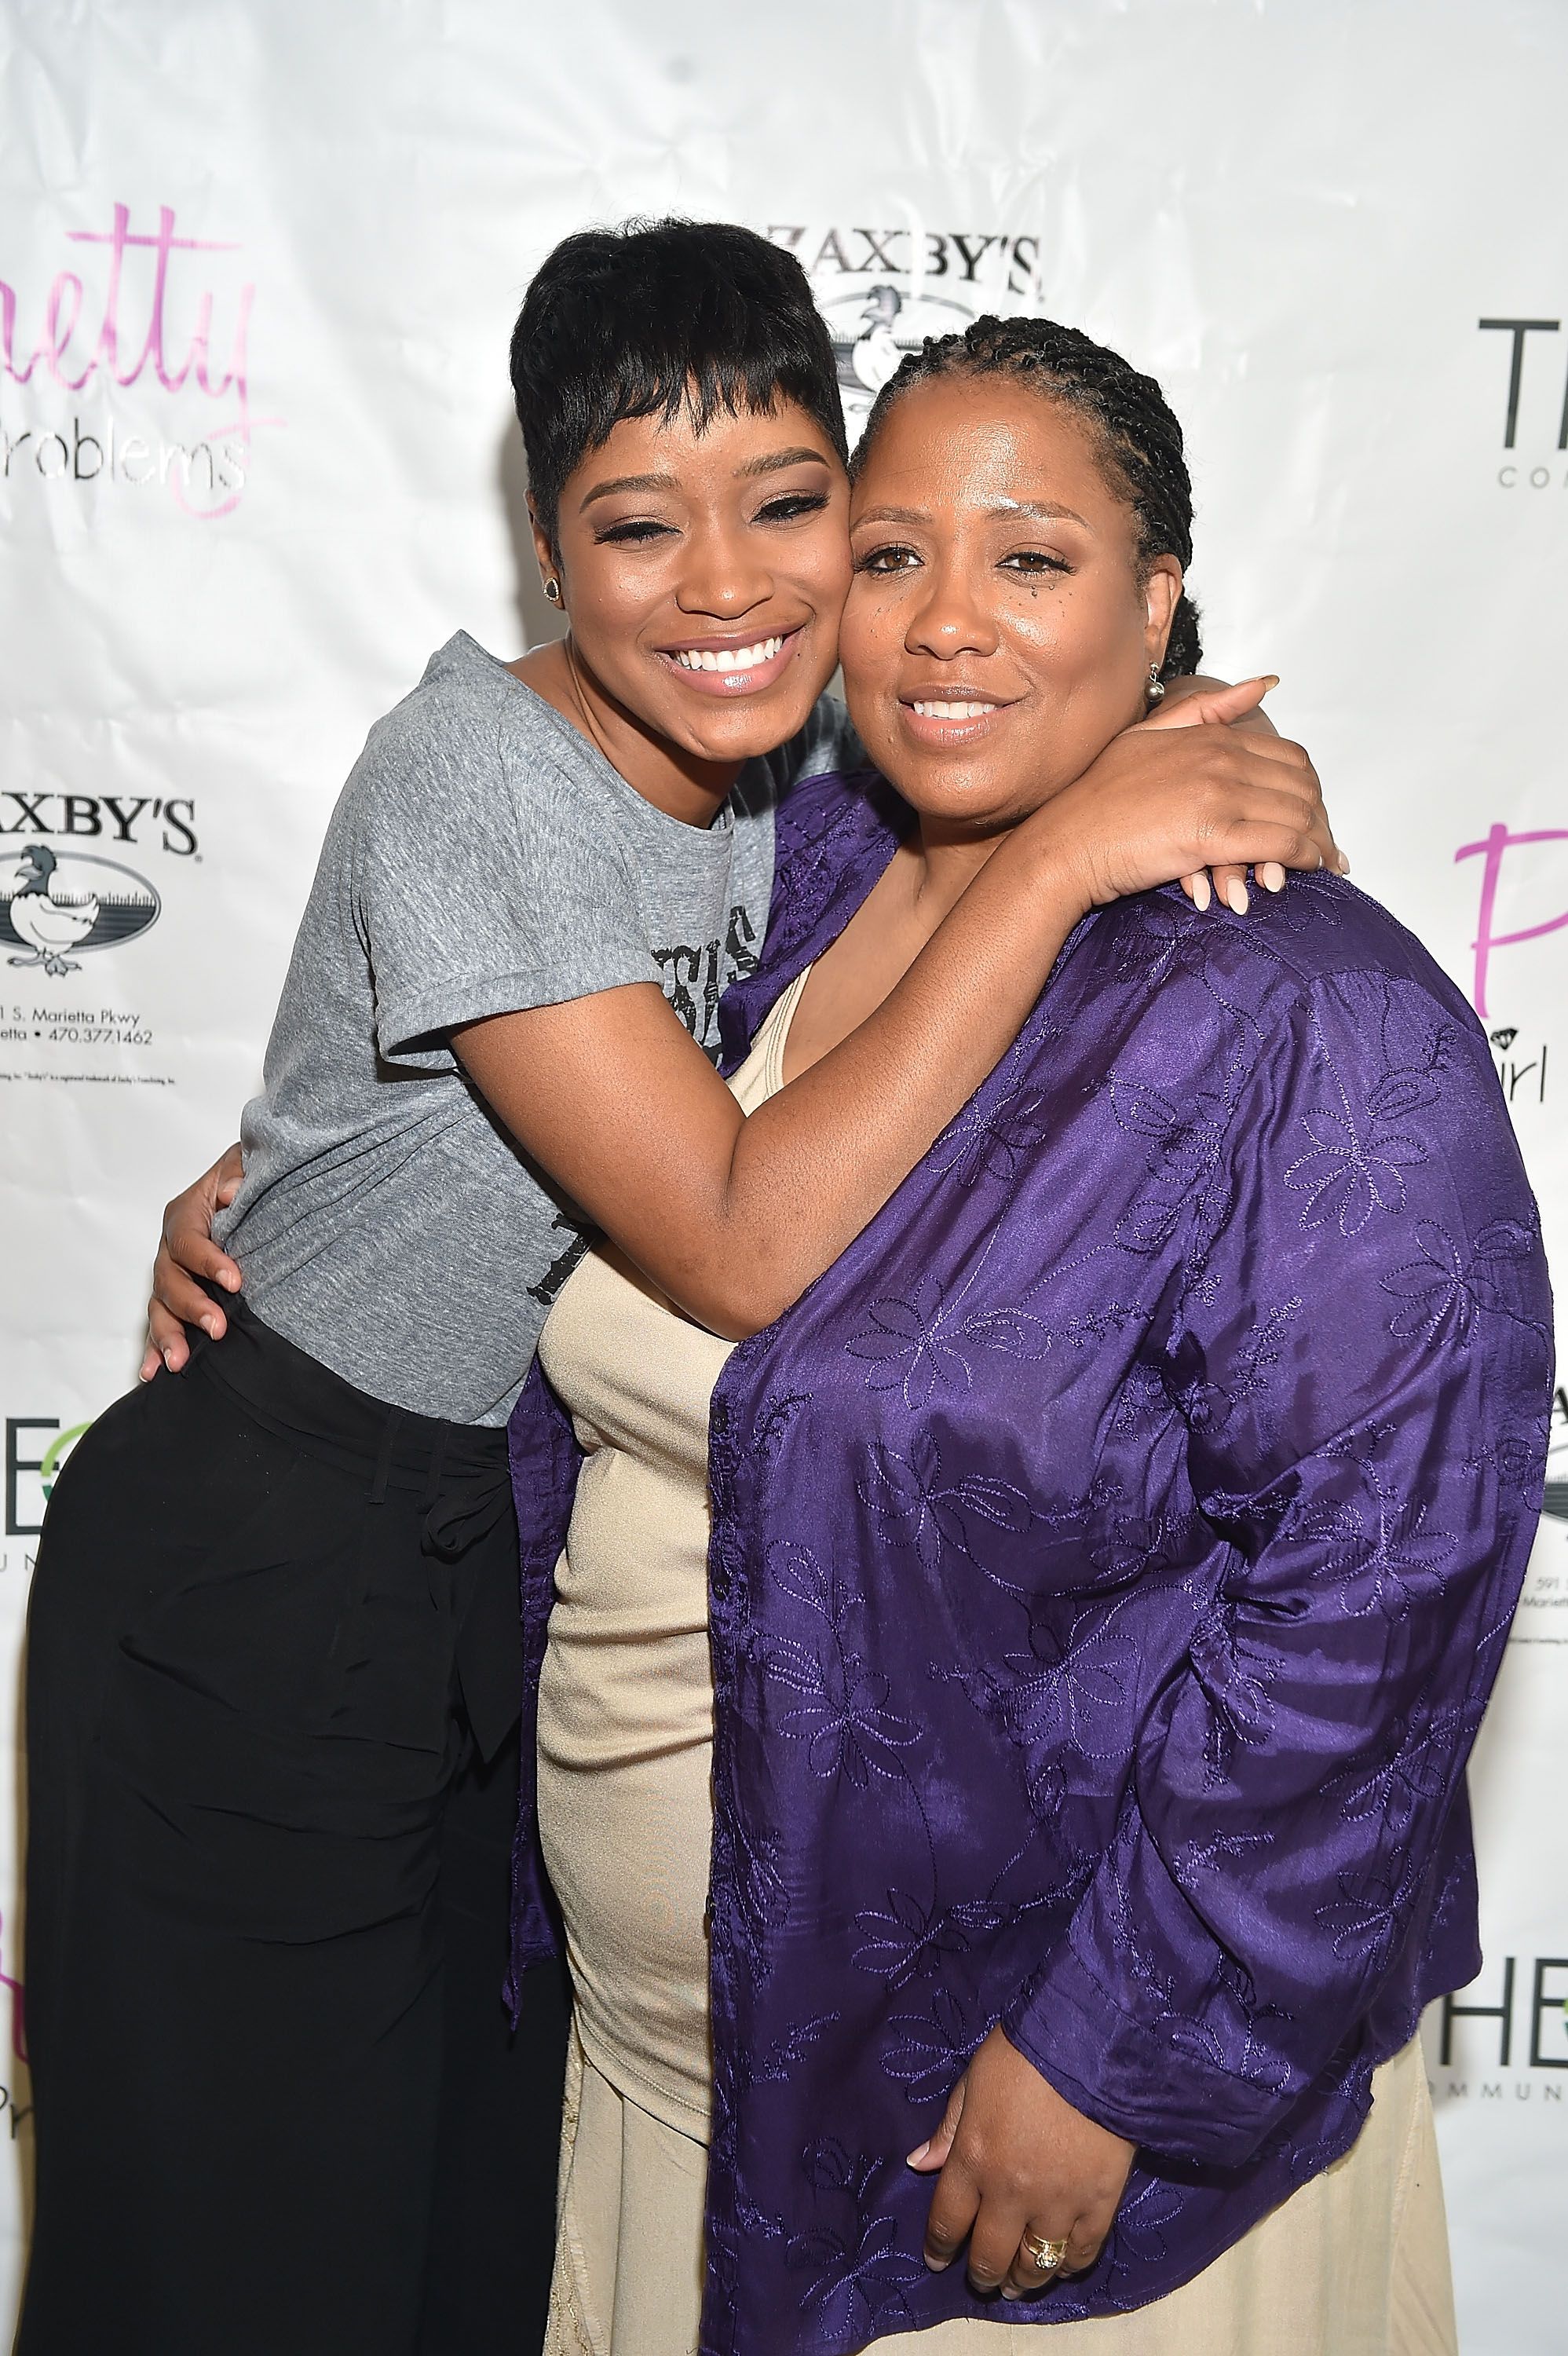 KeKe Palmer and Sharon Palmer durin Pretty Girls Problems' "The Girl's Guide To Finding Solutions" at Mansour Center on May 30, 2015 in Atlanta, Georgia. | Source: Getty Images